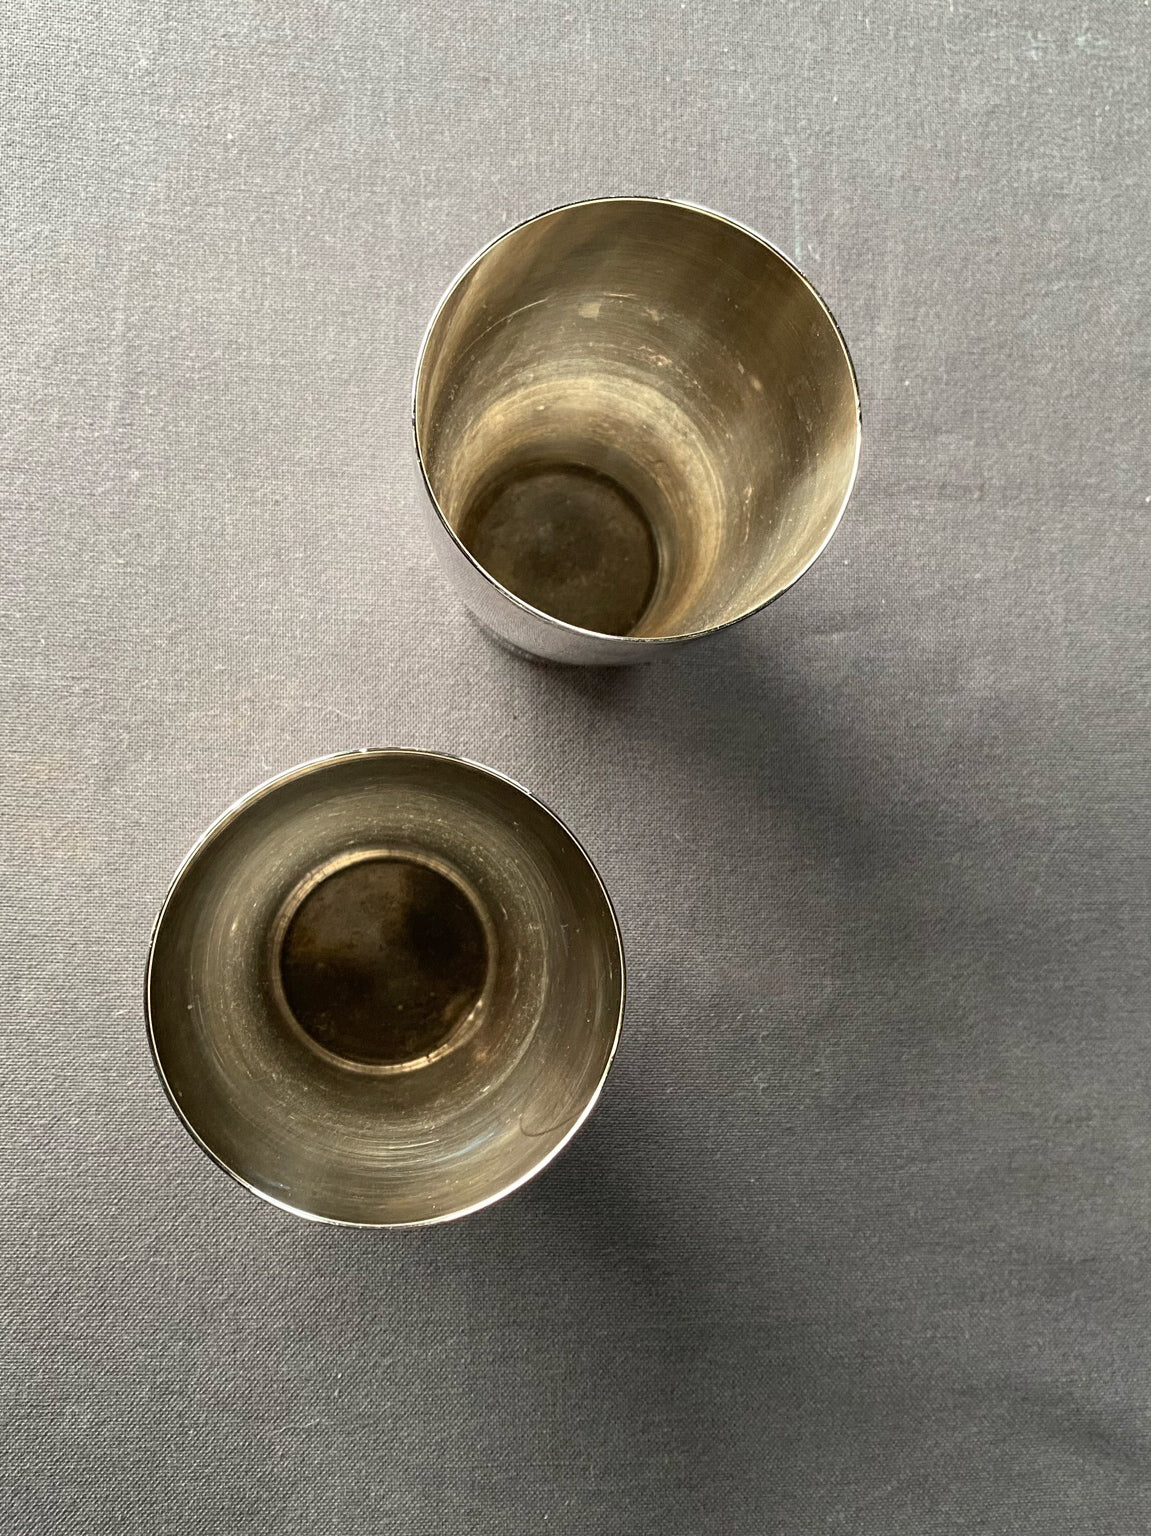 Pair of Silver Plated Tumblers